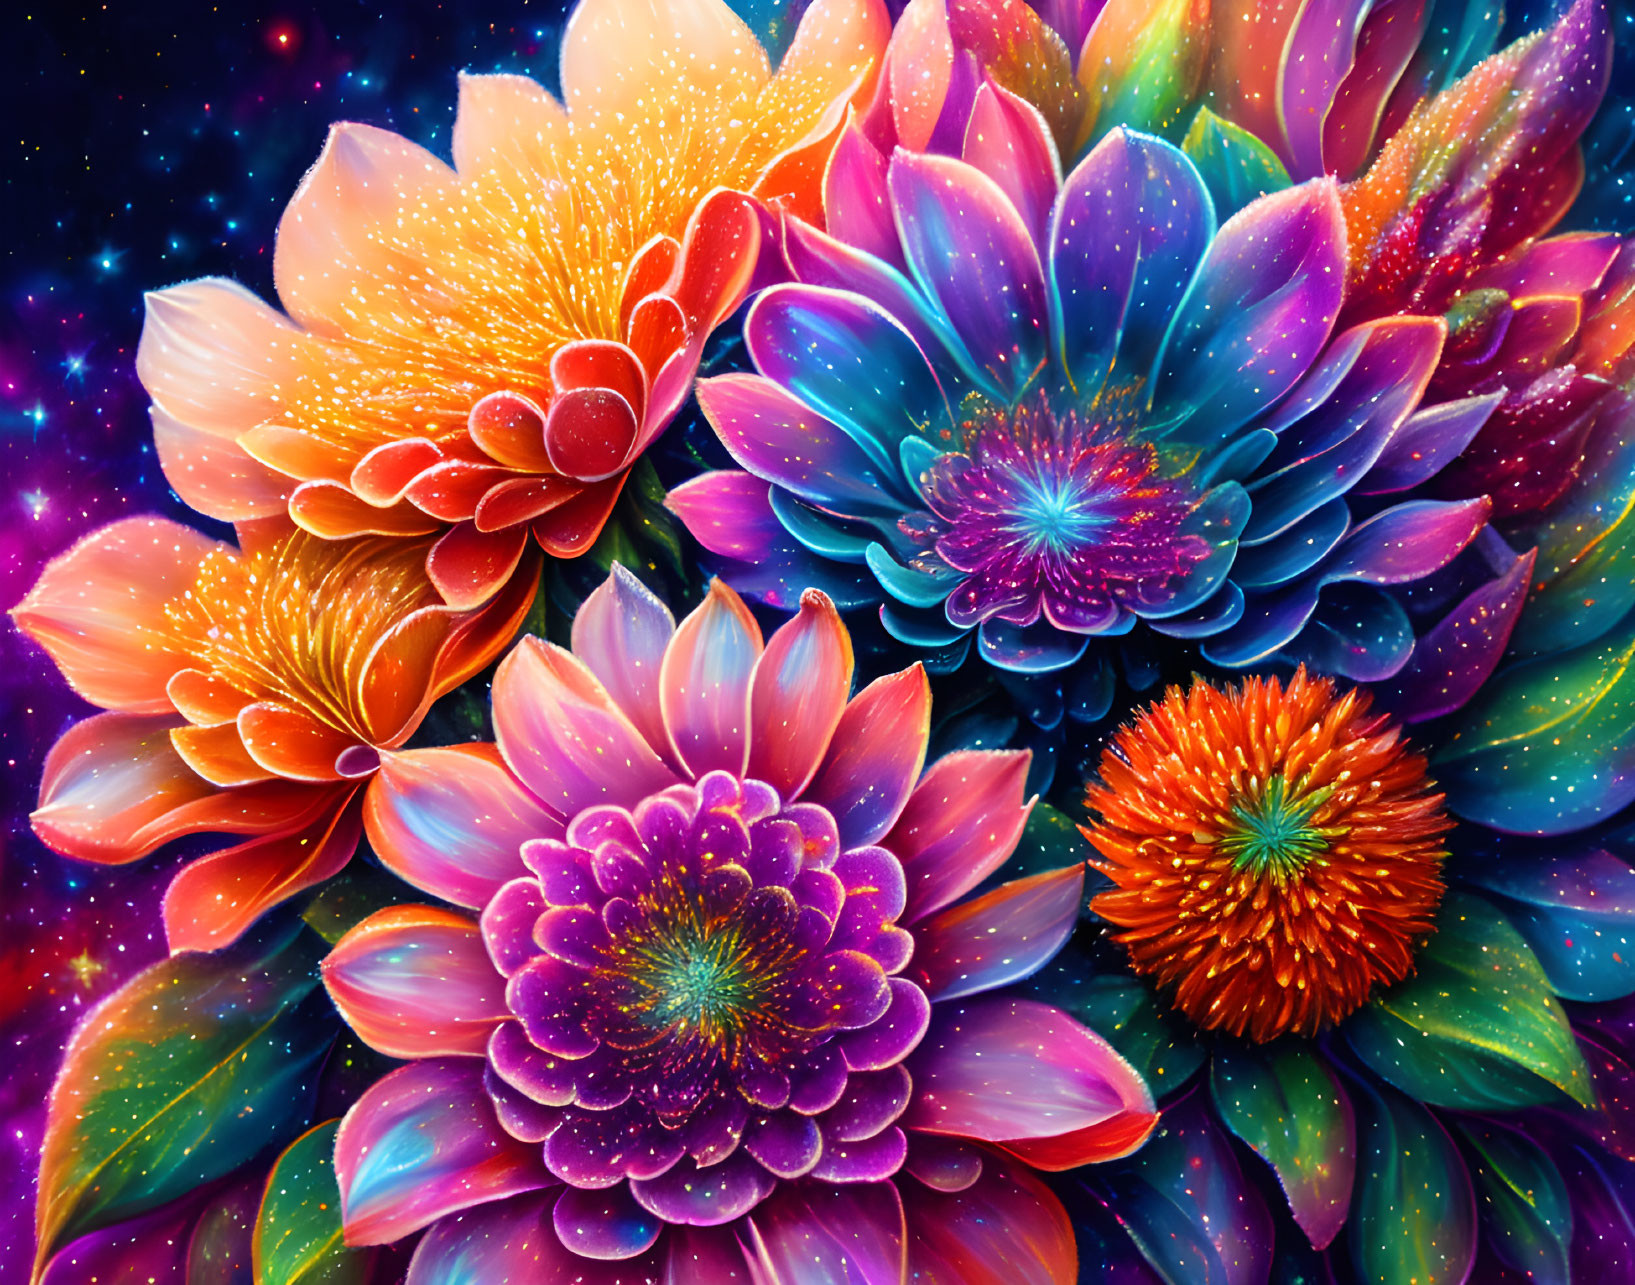 Colorful Flowers with Luminous Centers on Cosmic Background